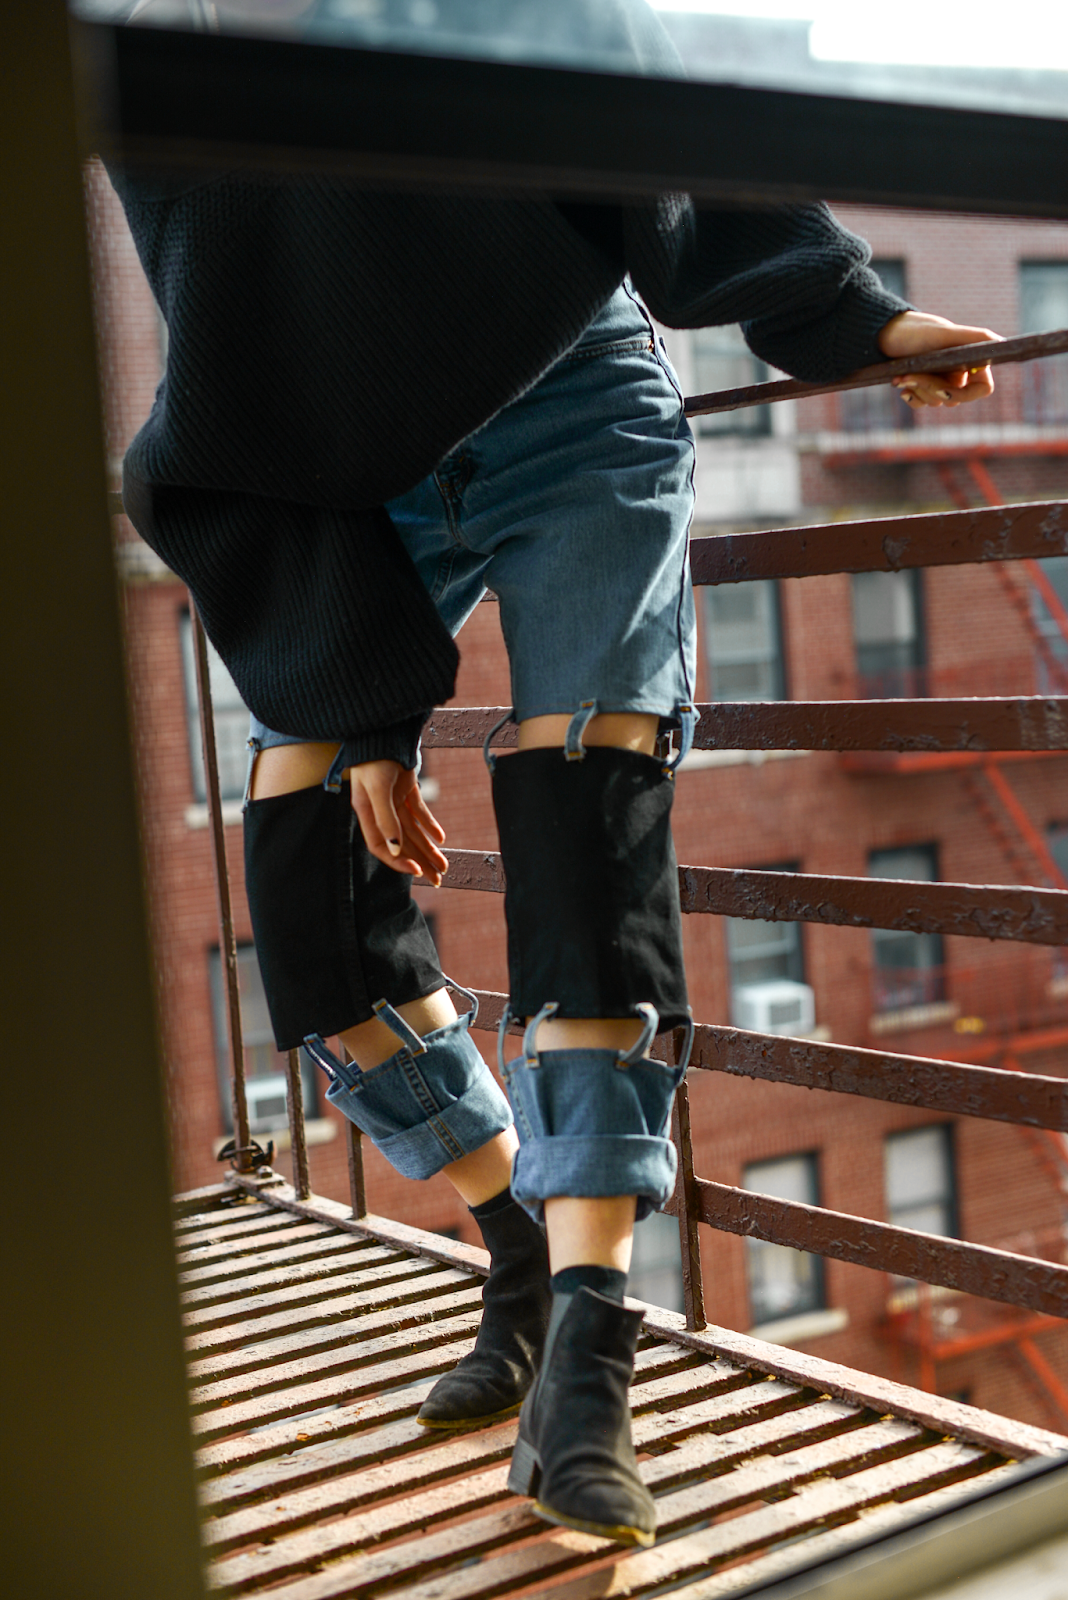 Fire escape fashion editorial, sustainable denim brand, AndAgain NYC, recycled jeans, colorblocked denim, New York personal style blogger, New York City lifestyle - Press to Resume / 012019 - FOREVERVANNY.com